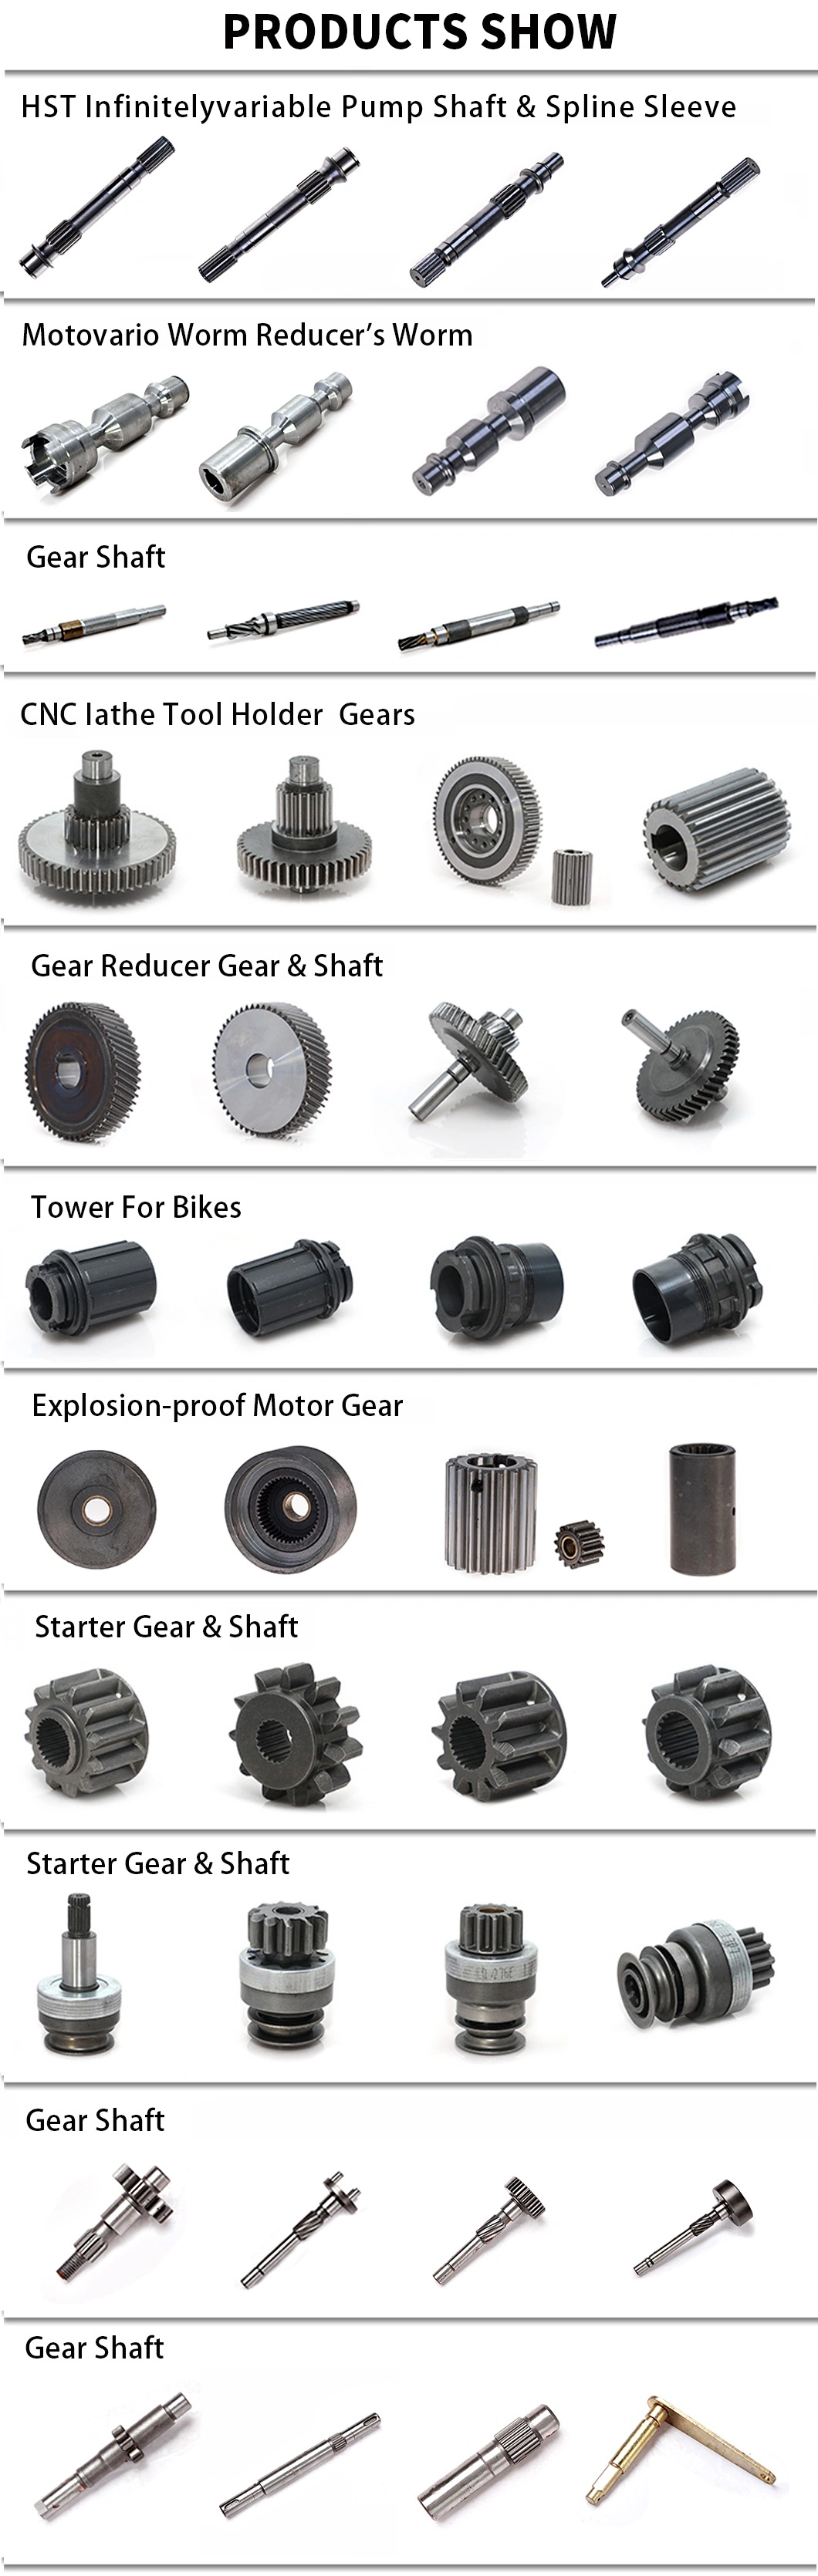 Carbon Steel Roller Drive Pinion and Transmission Gear Drive Shaft